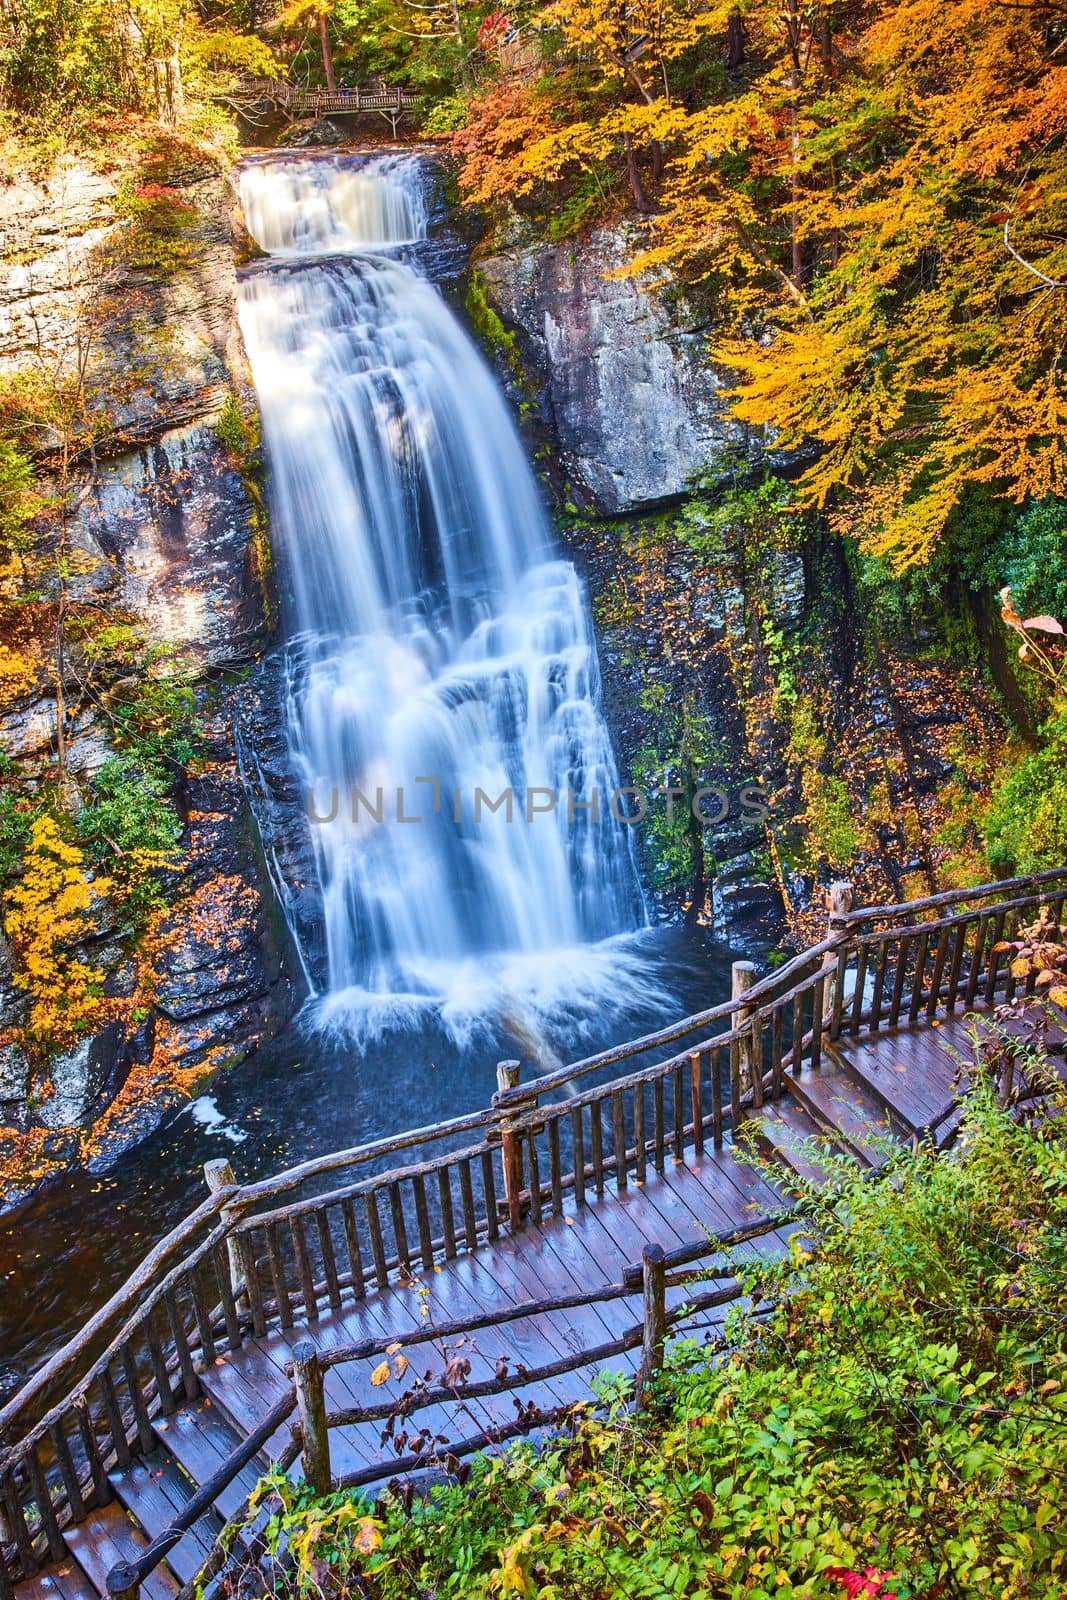 Image of Boardwalk along viewing cliffs of stunning waterfall surrounded by fall leaves and foliage